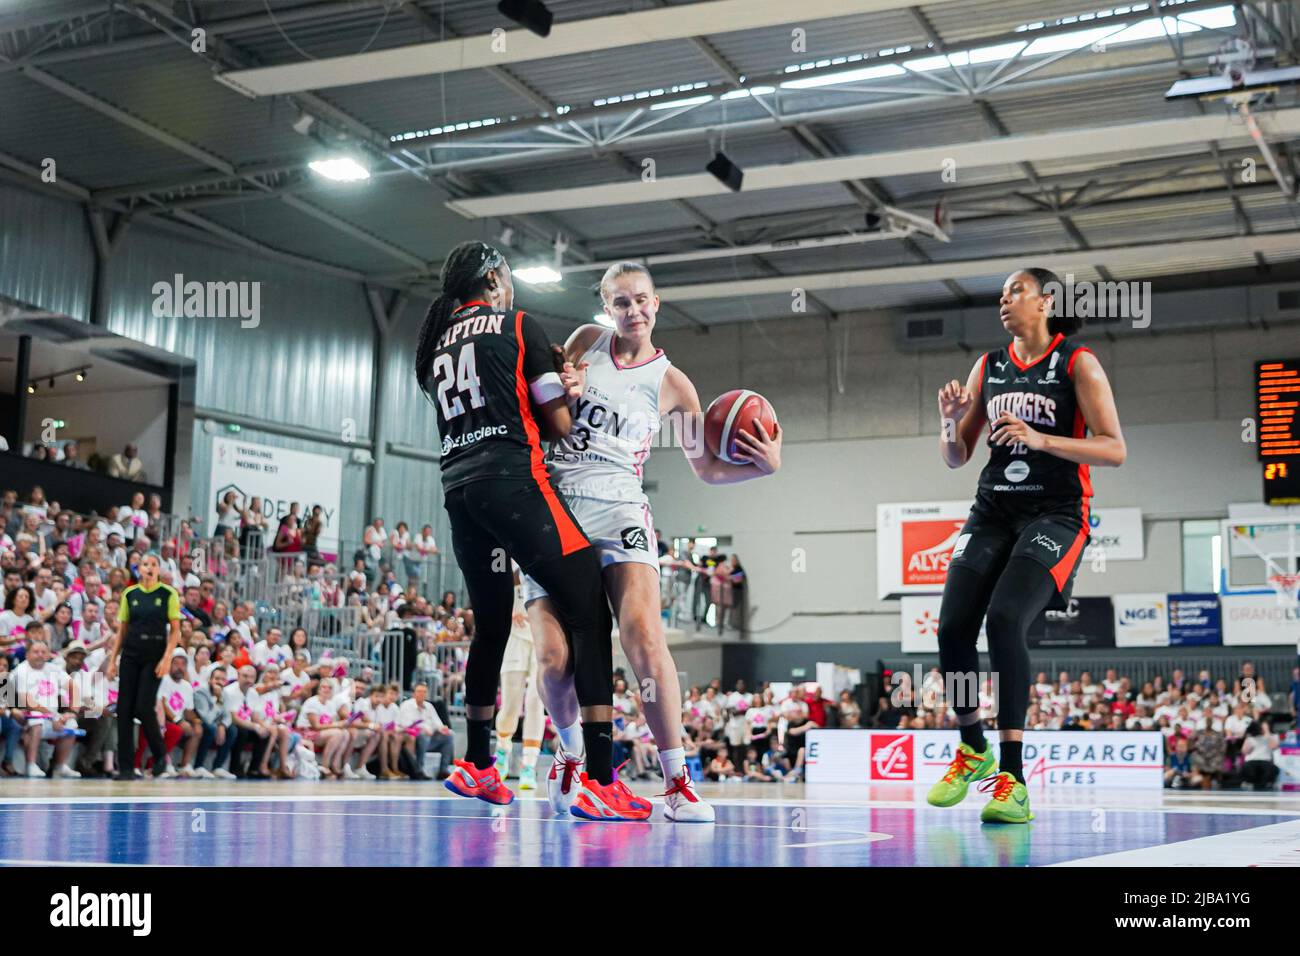 June 4, 2022, Lyon, France, France: Lyon, France, June 4th 2022: Juste  Jocyte (3 Lyon) is fouled by Keisha Hampton (24 Bourges) during the LFB  Play-offs final third match between Lyon and